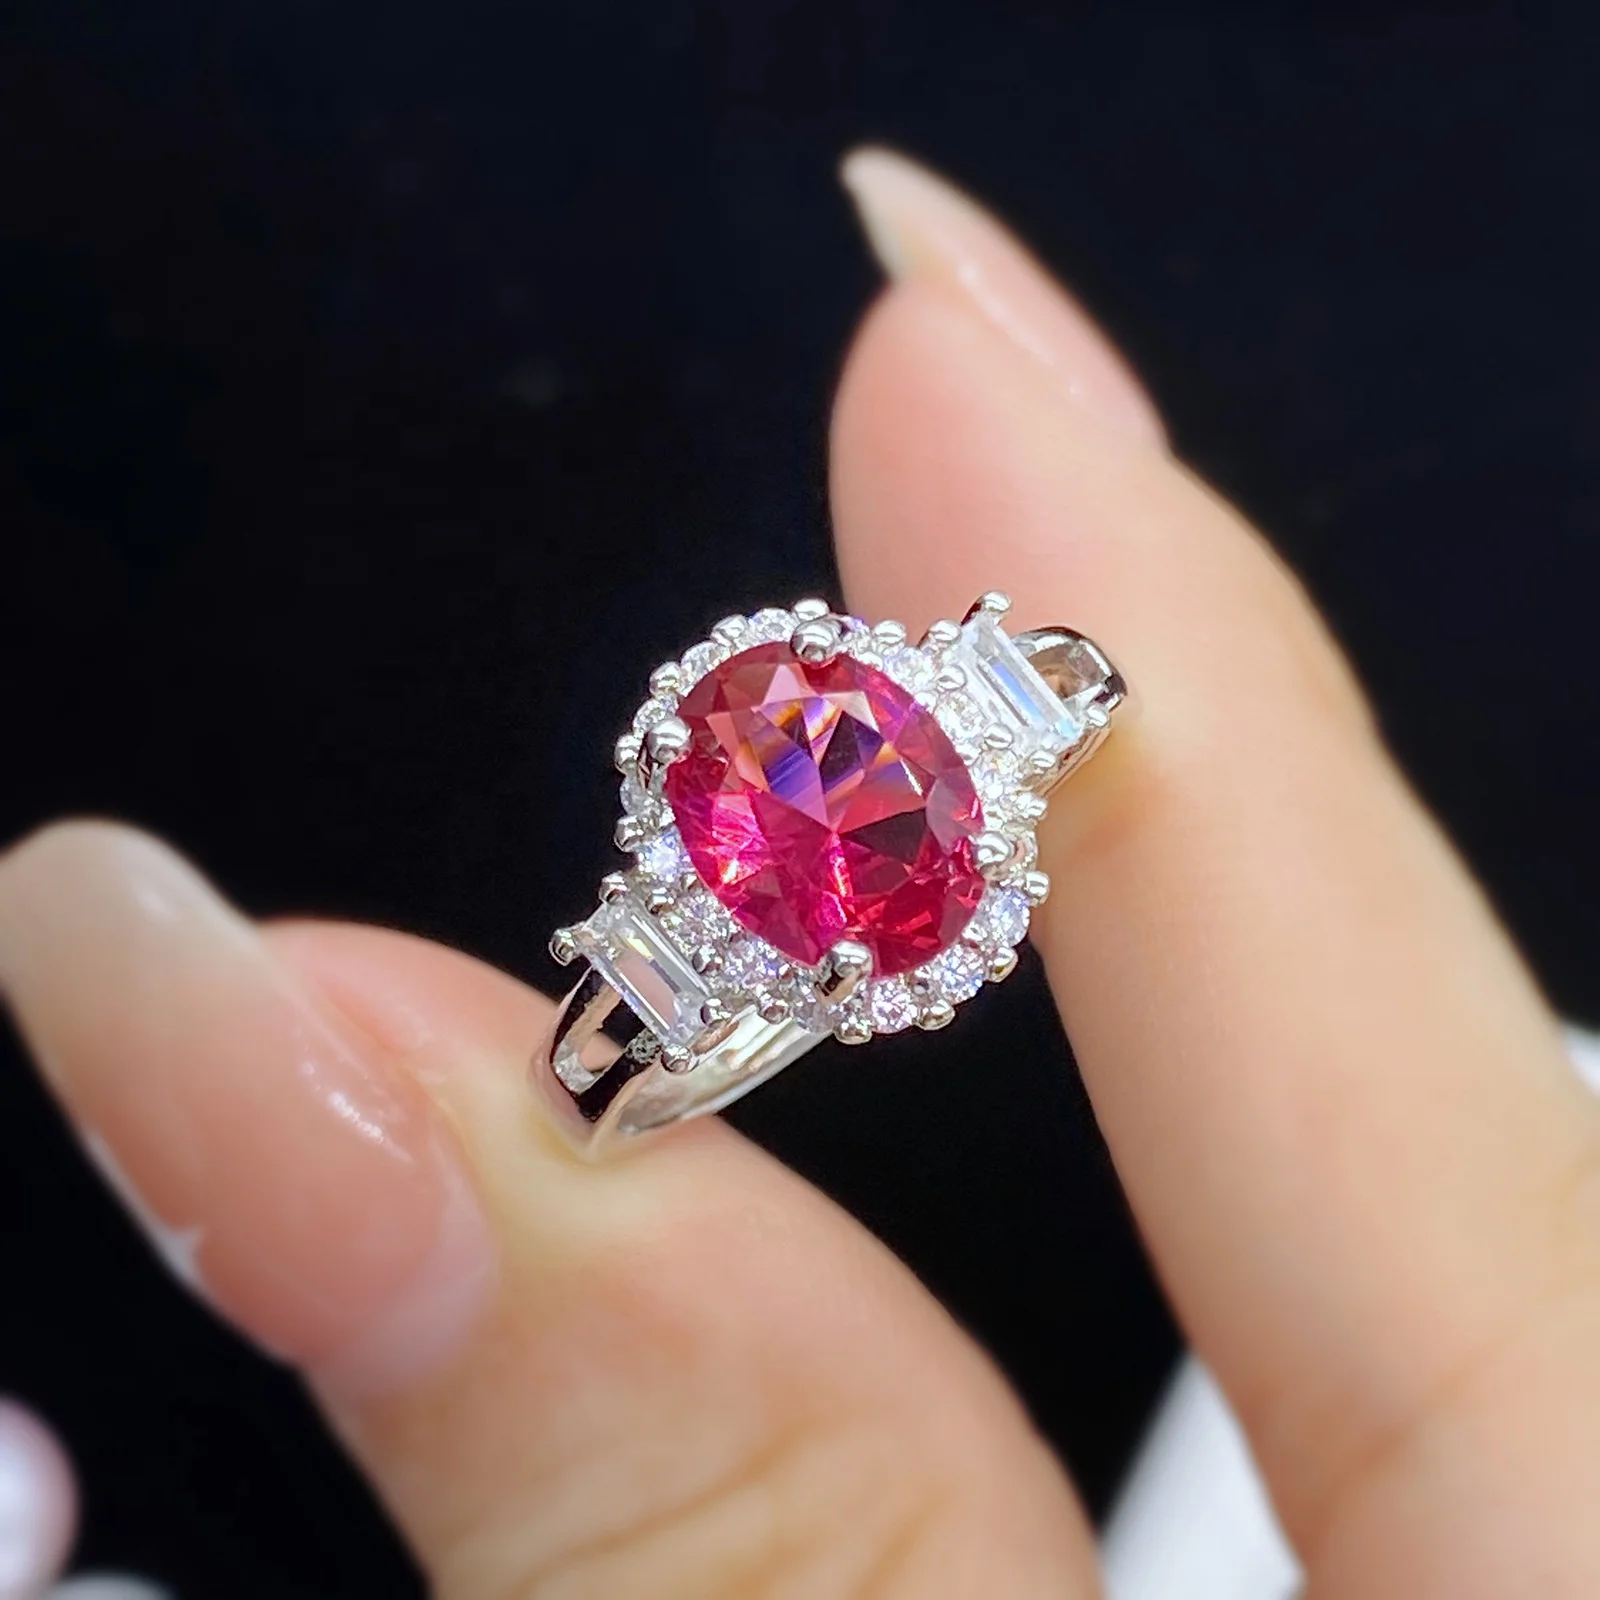 

New Fashion Temperament Oval Group Inlaid Zircon Simulation Red Tourmaline Color Treasure Adjustable Ring For Women Jewelry, Customized color